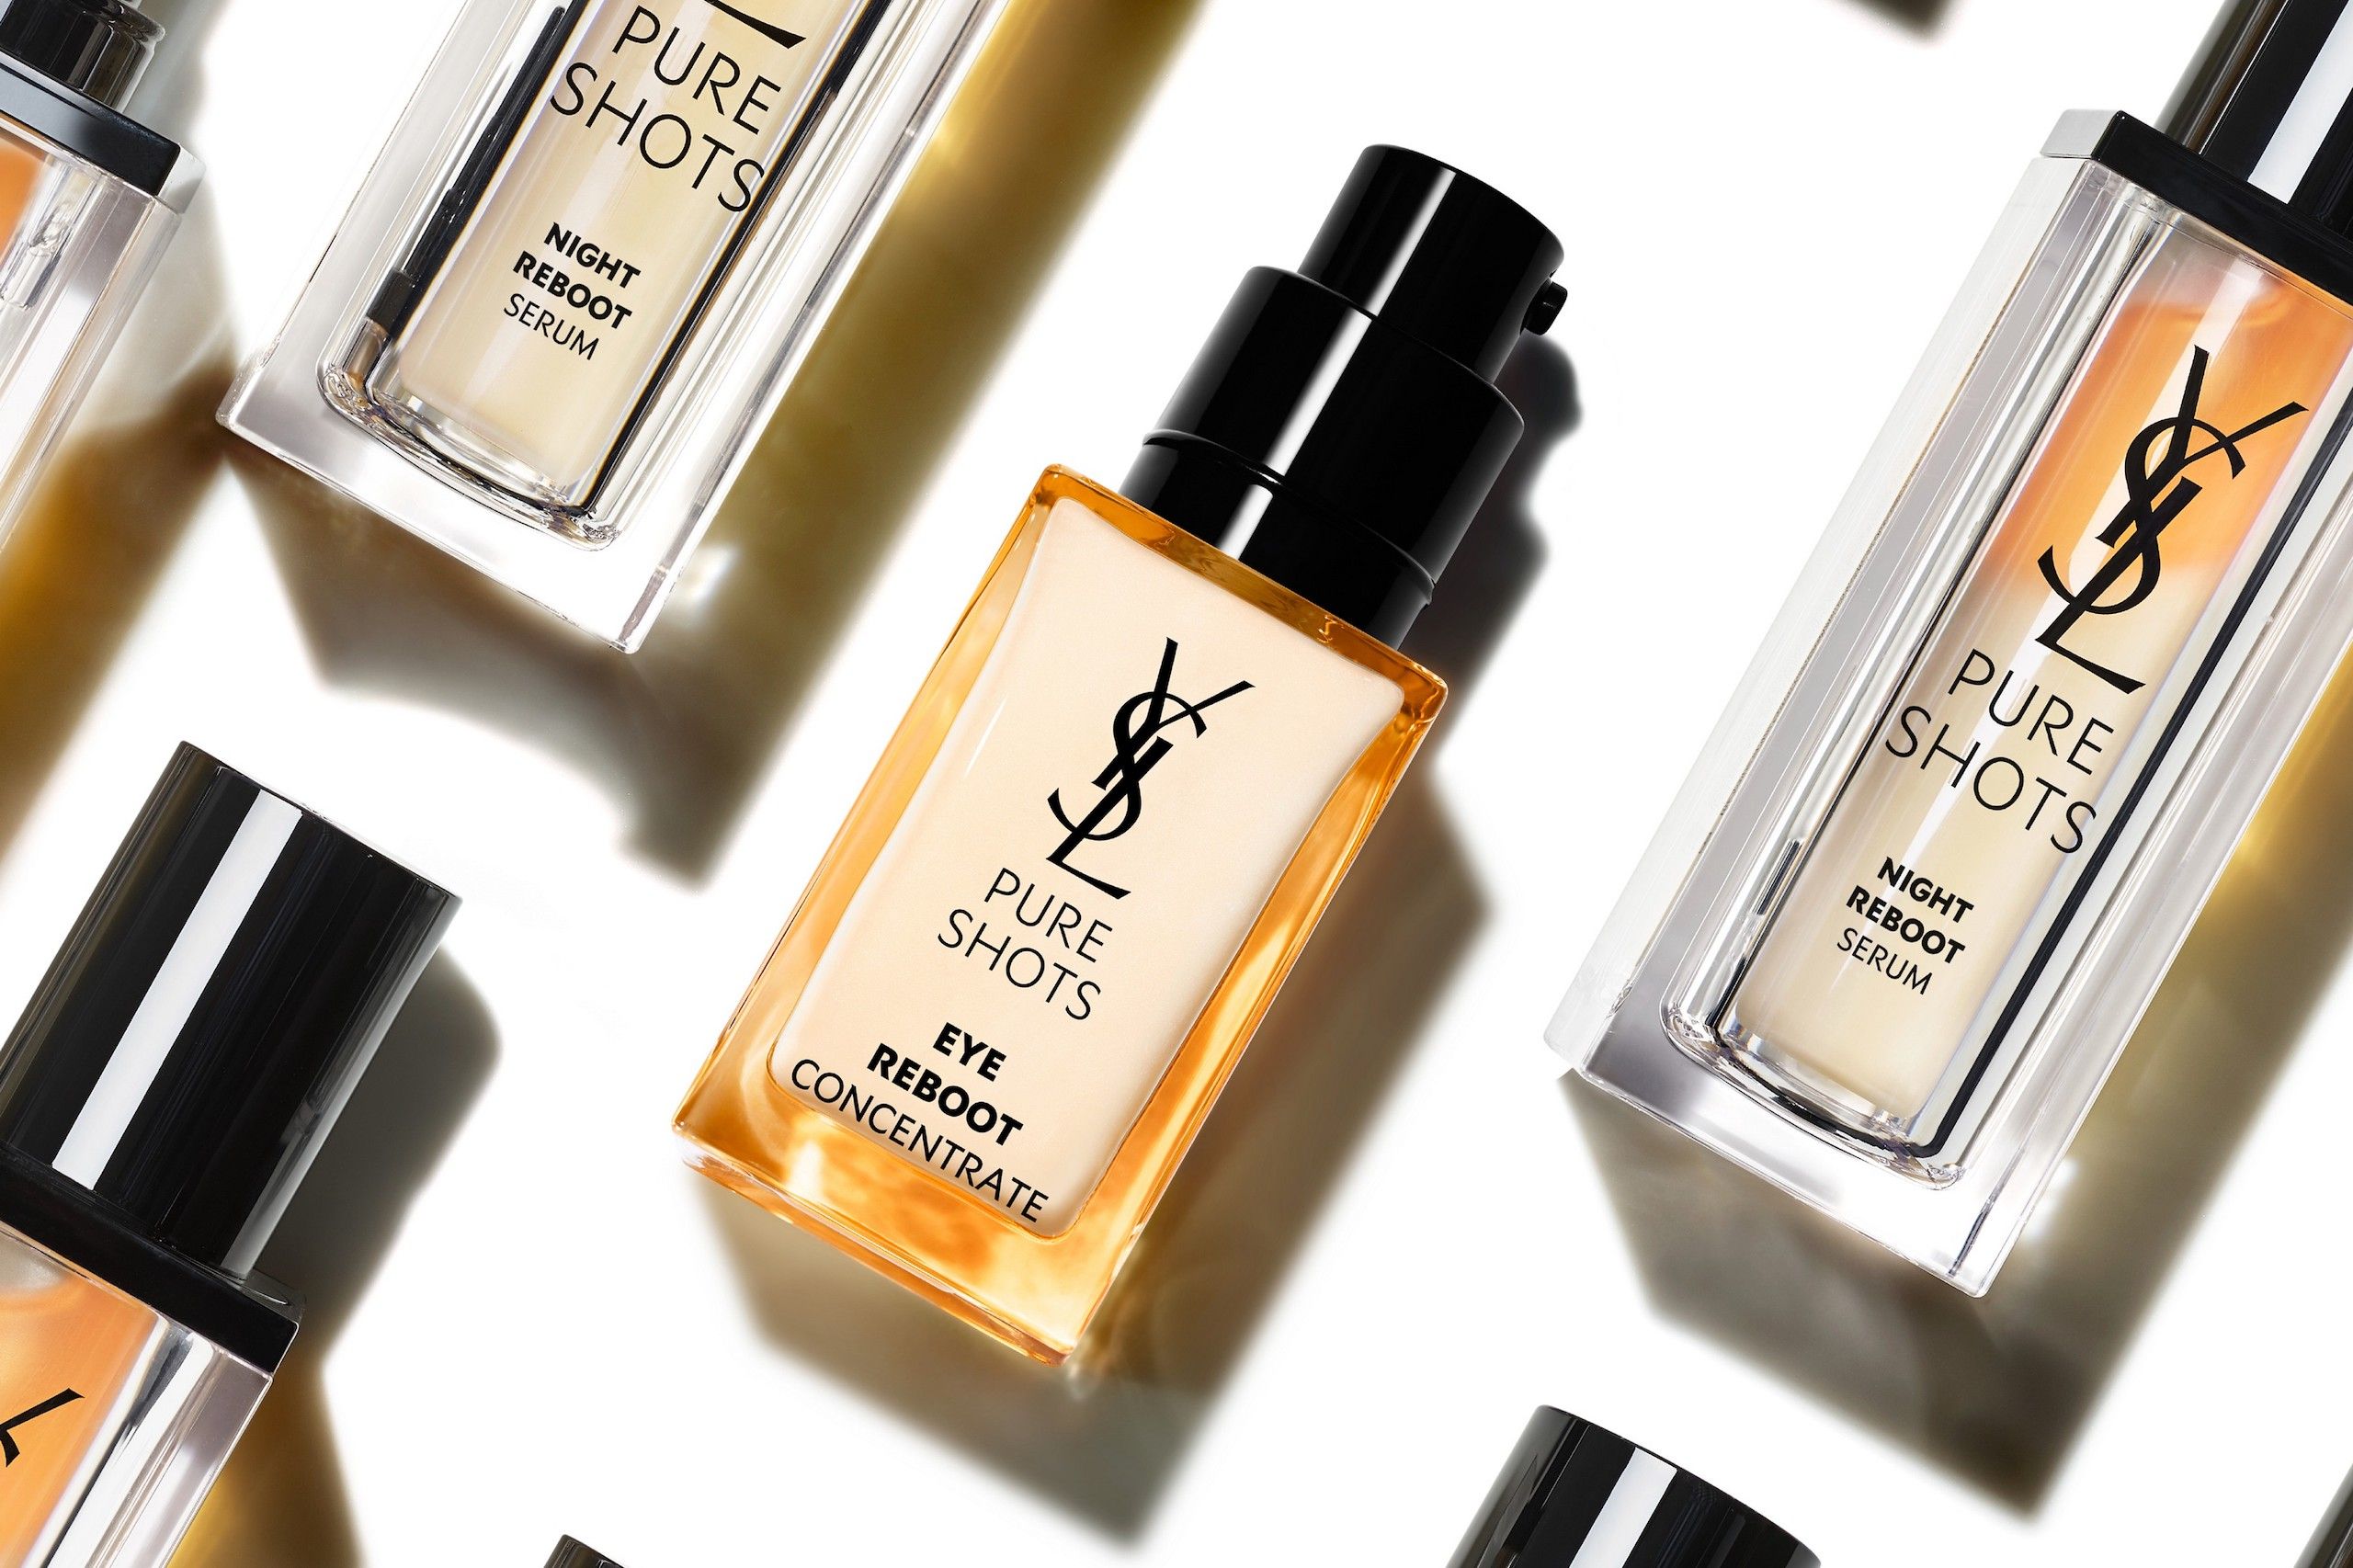 New luxury skincare - YSL Beauty eye reboot concentrate